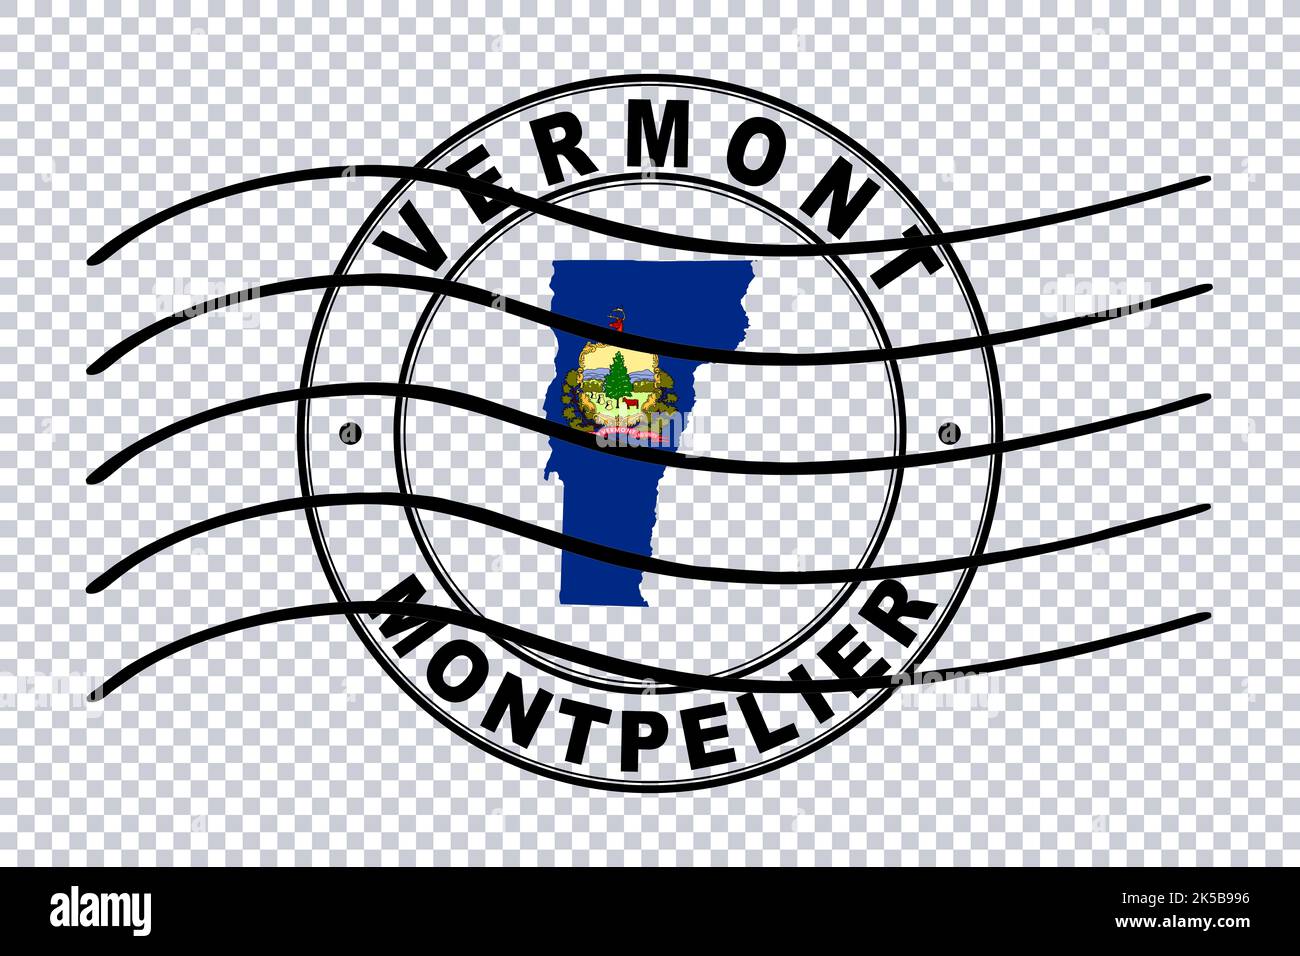 Map Of Vermont Postal Passport Stamp Travel Stamp Clipping Path